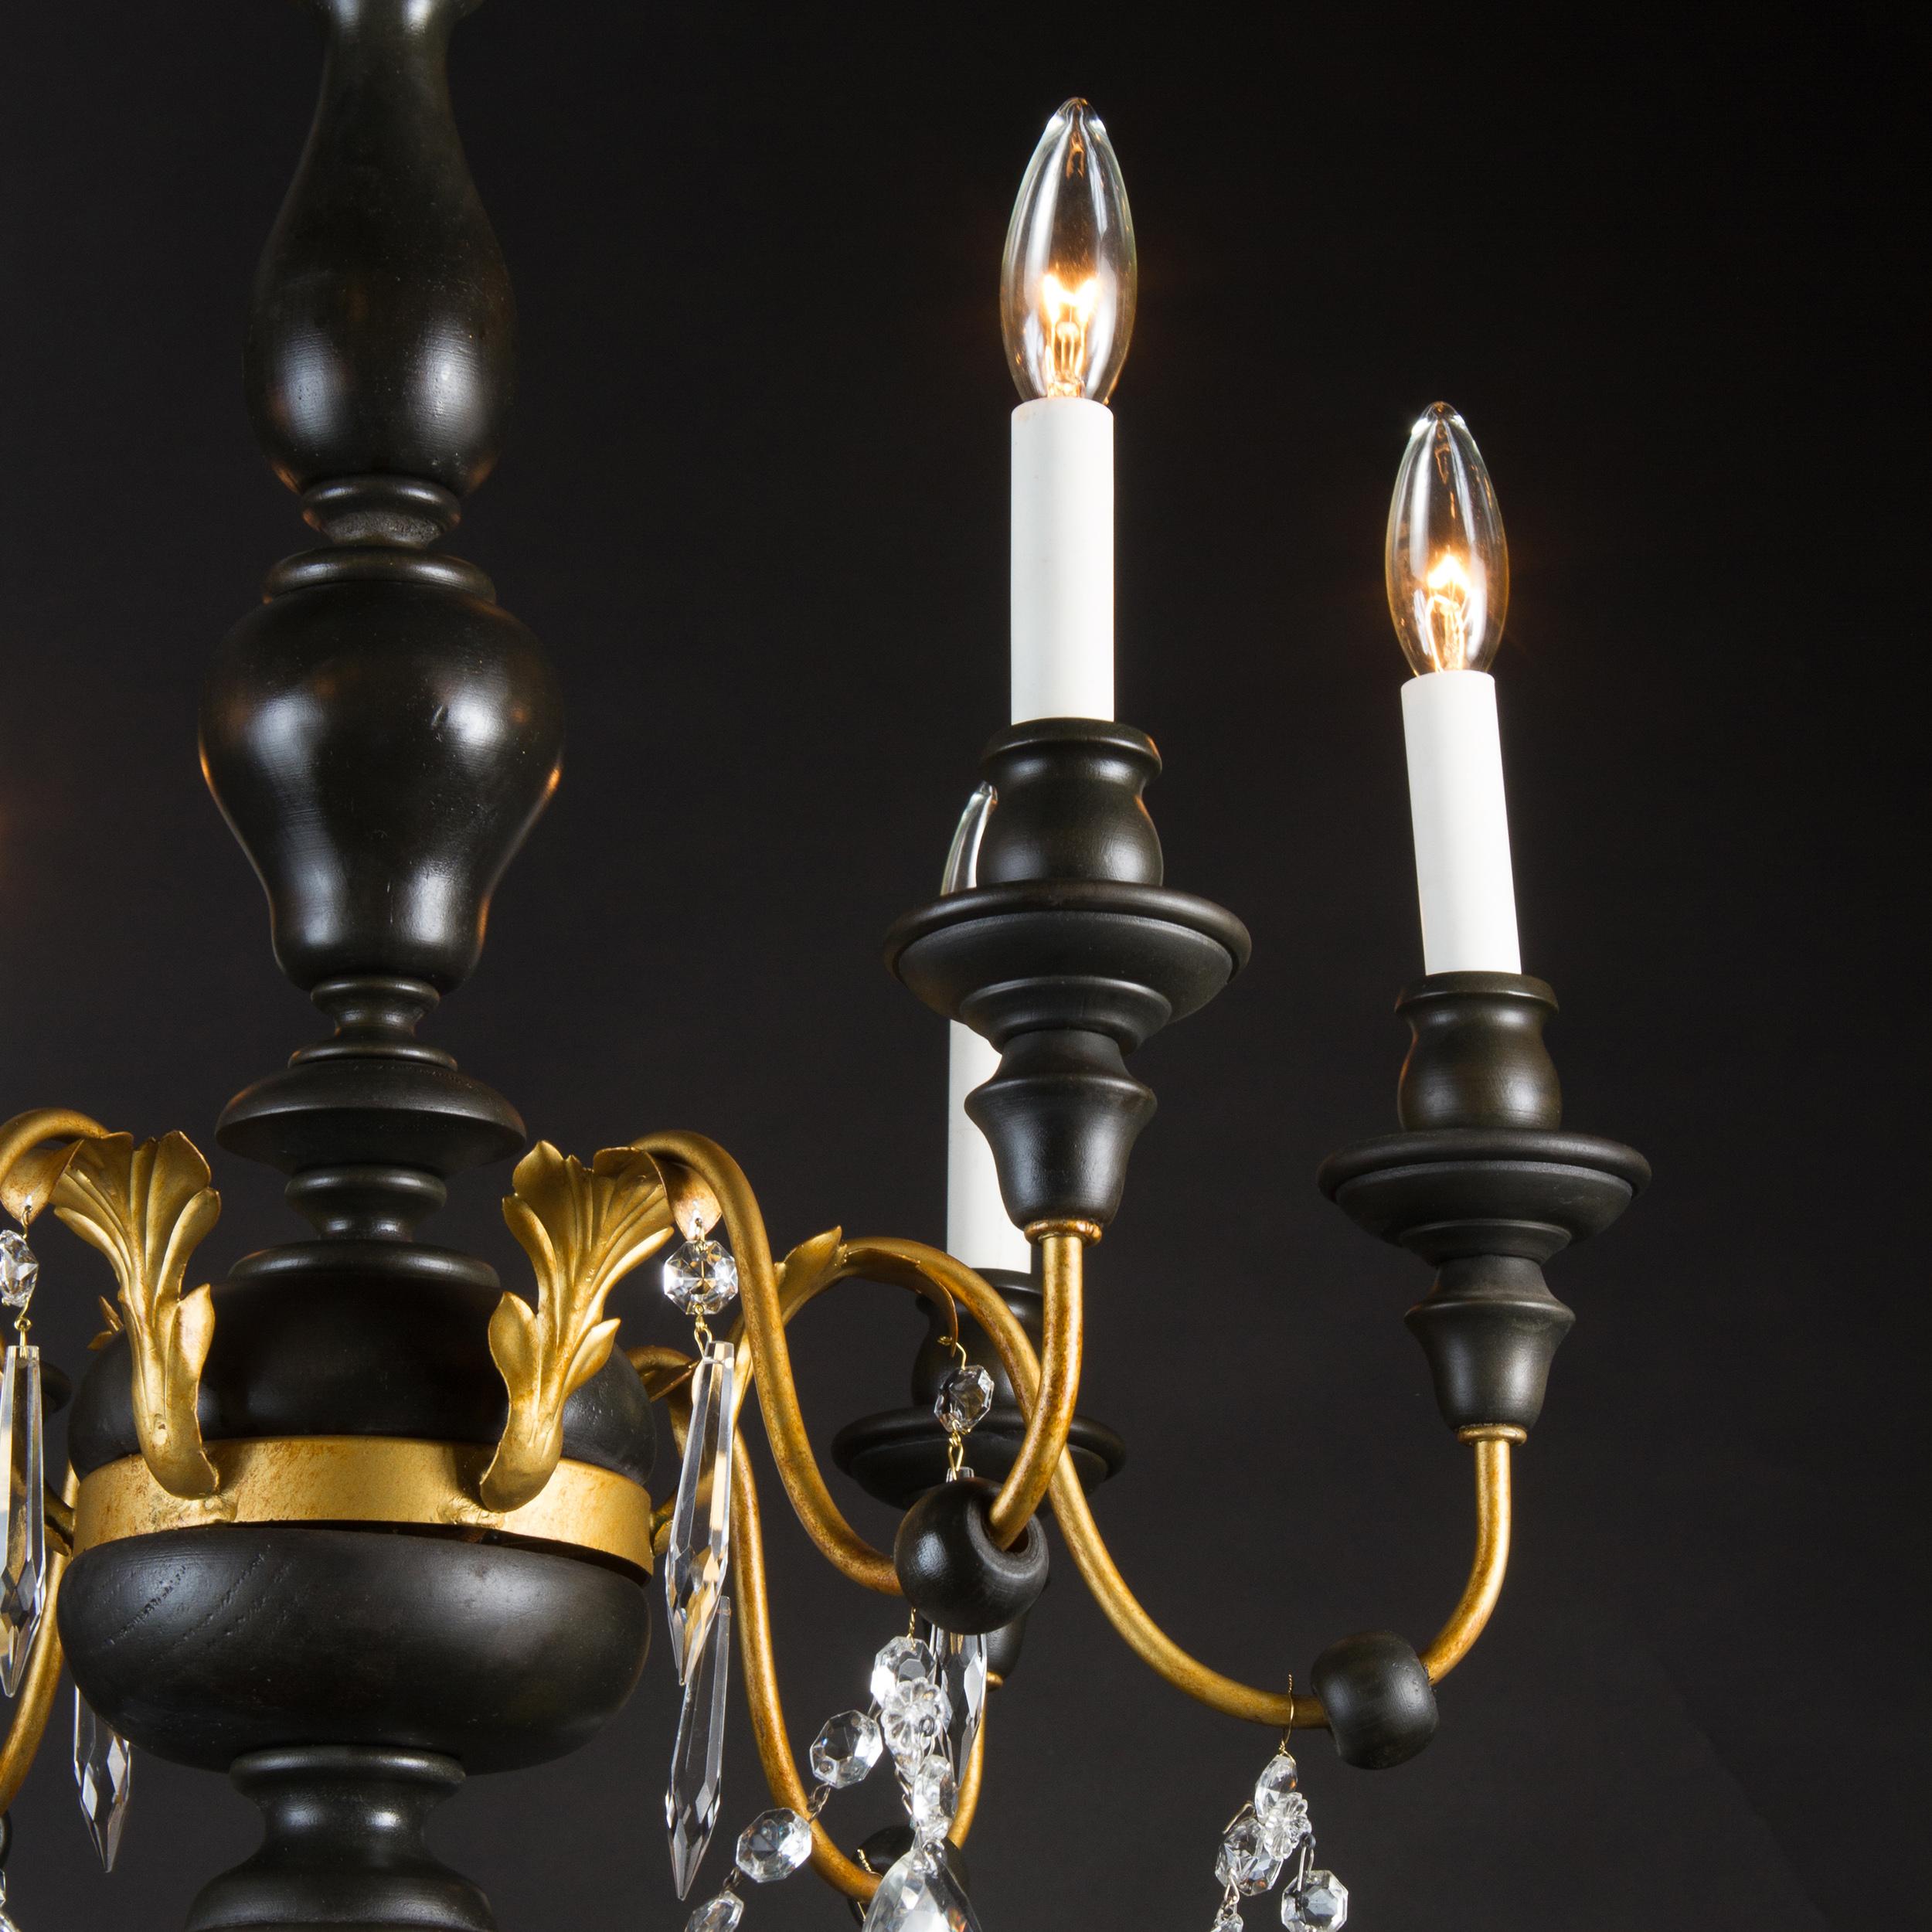 Dating to the mid-20th century, this simple and elegant chandelier is stylistically Louis XVI. Made primarily of wood and draped with crystal, the fixture also has decorative iron and tole elements found at top and on the bases of the arms. The arms